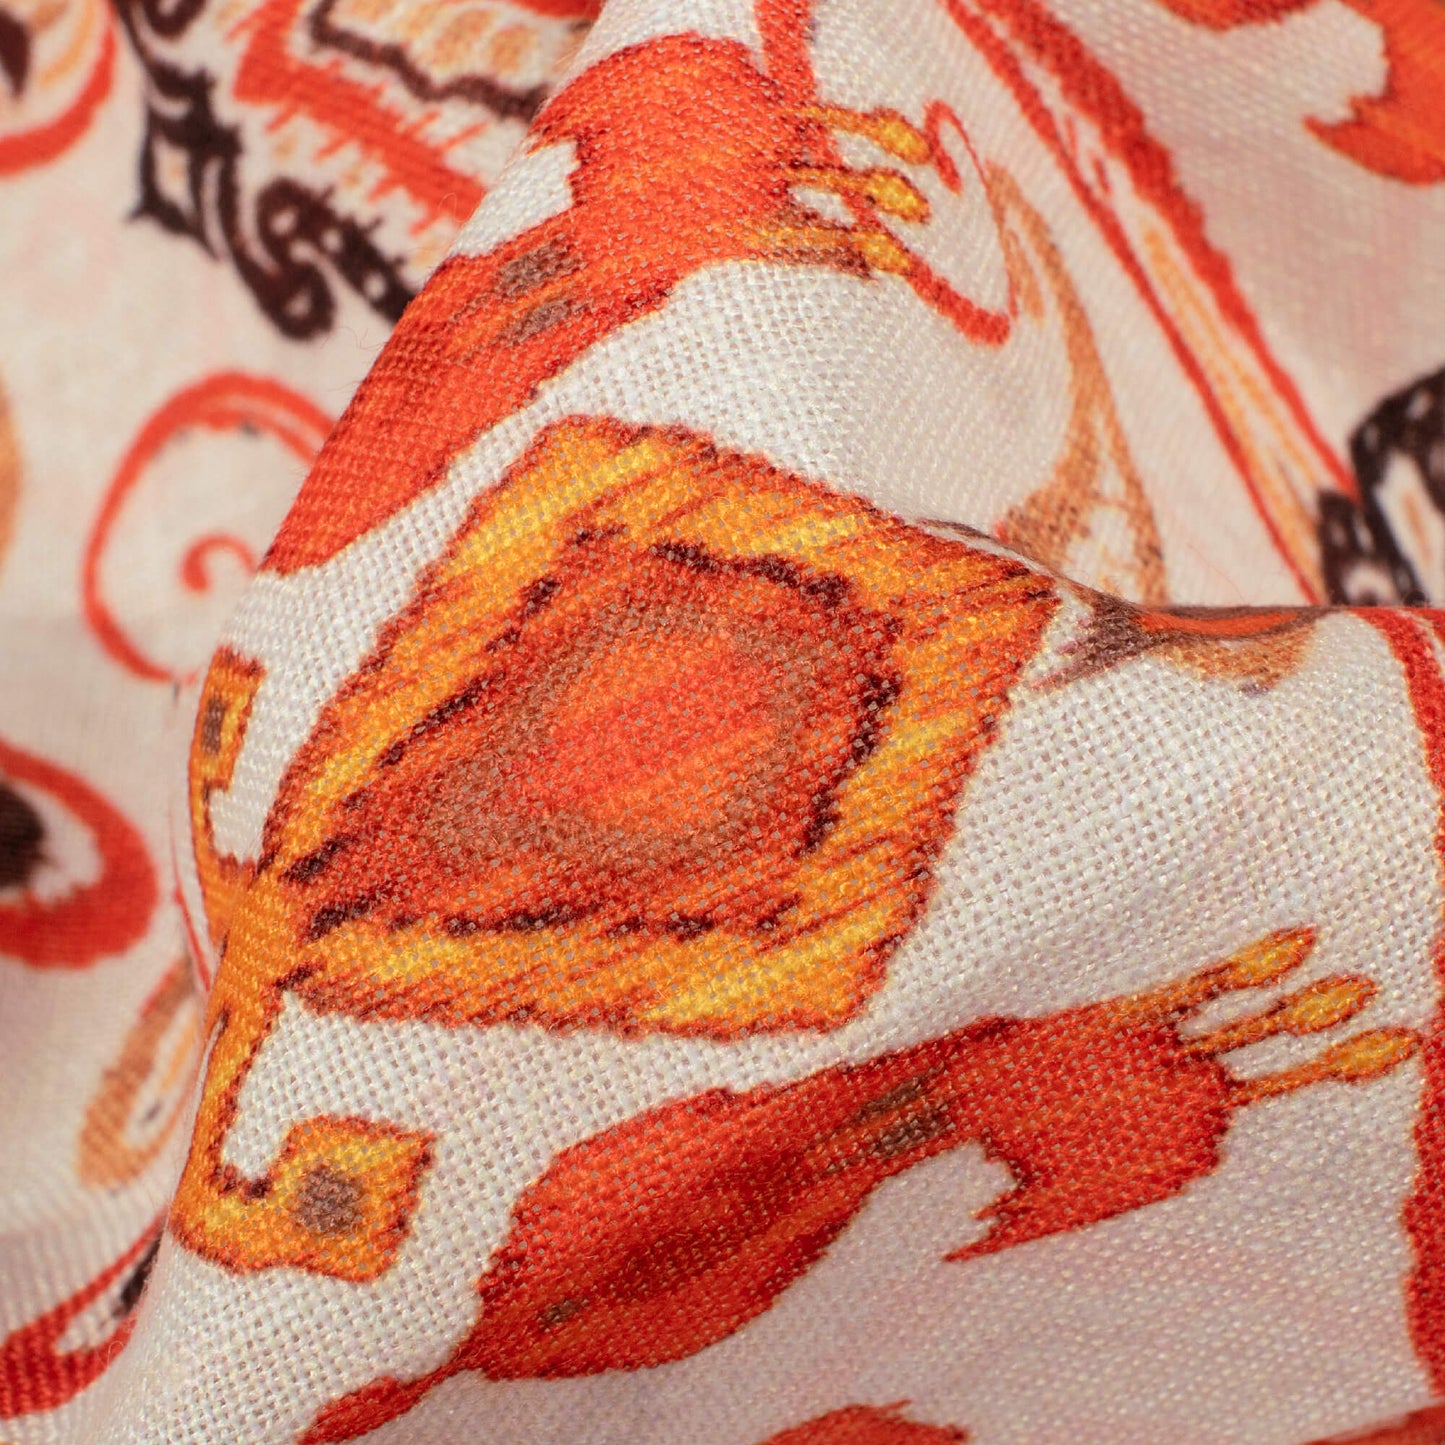 Daisy White And Salamander Orange Ethnic Pattern Digital Print Linen Textured Fabric (Width 56 Inches)